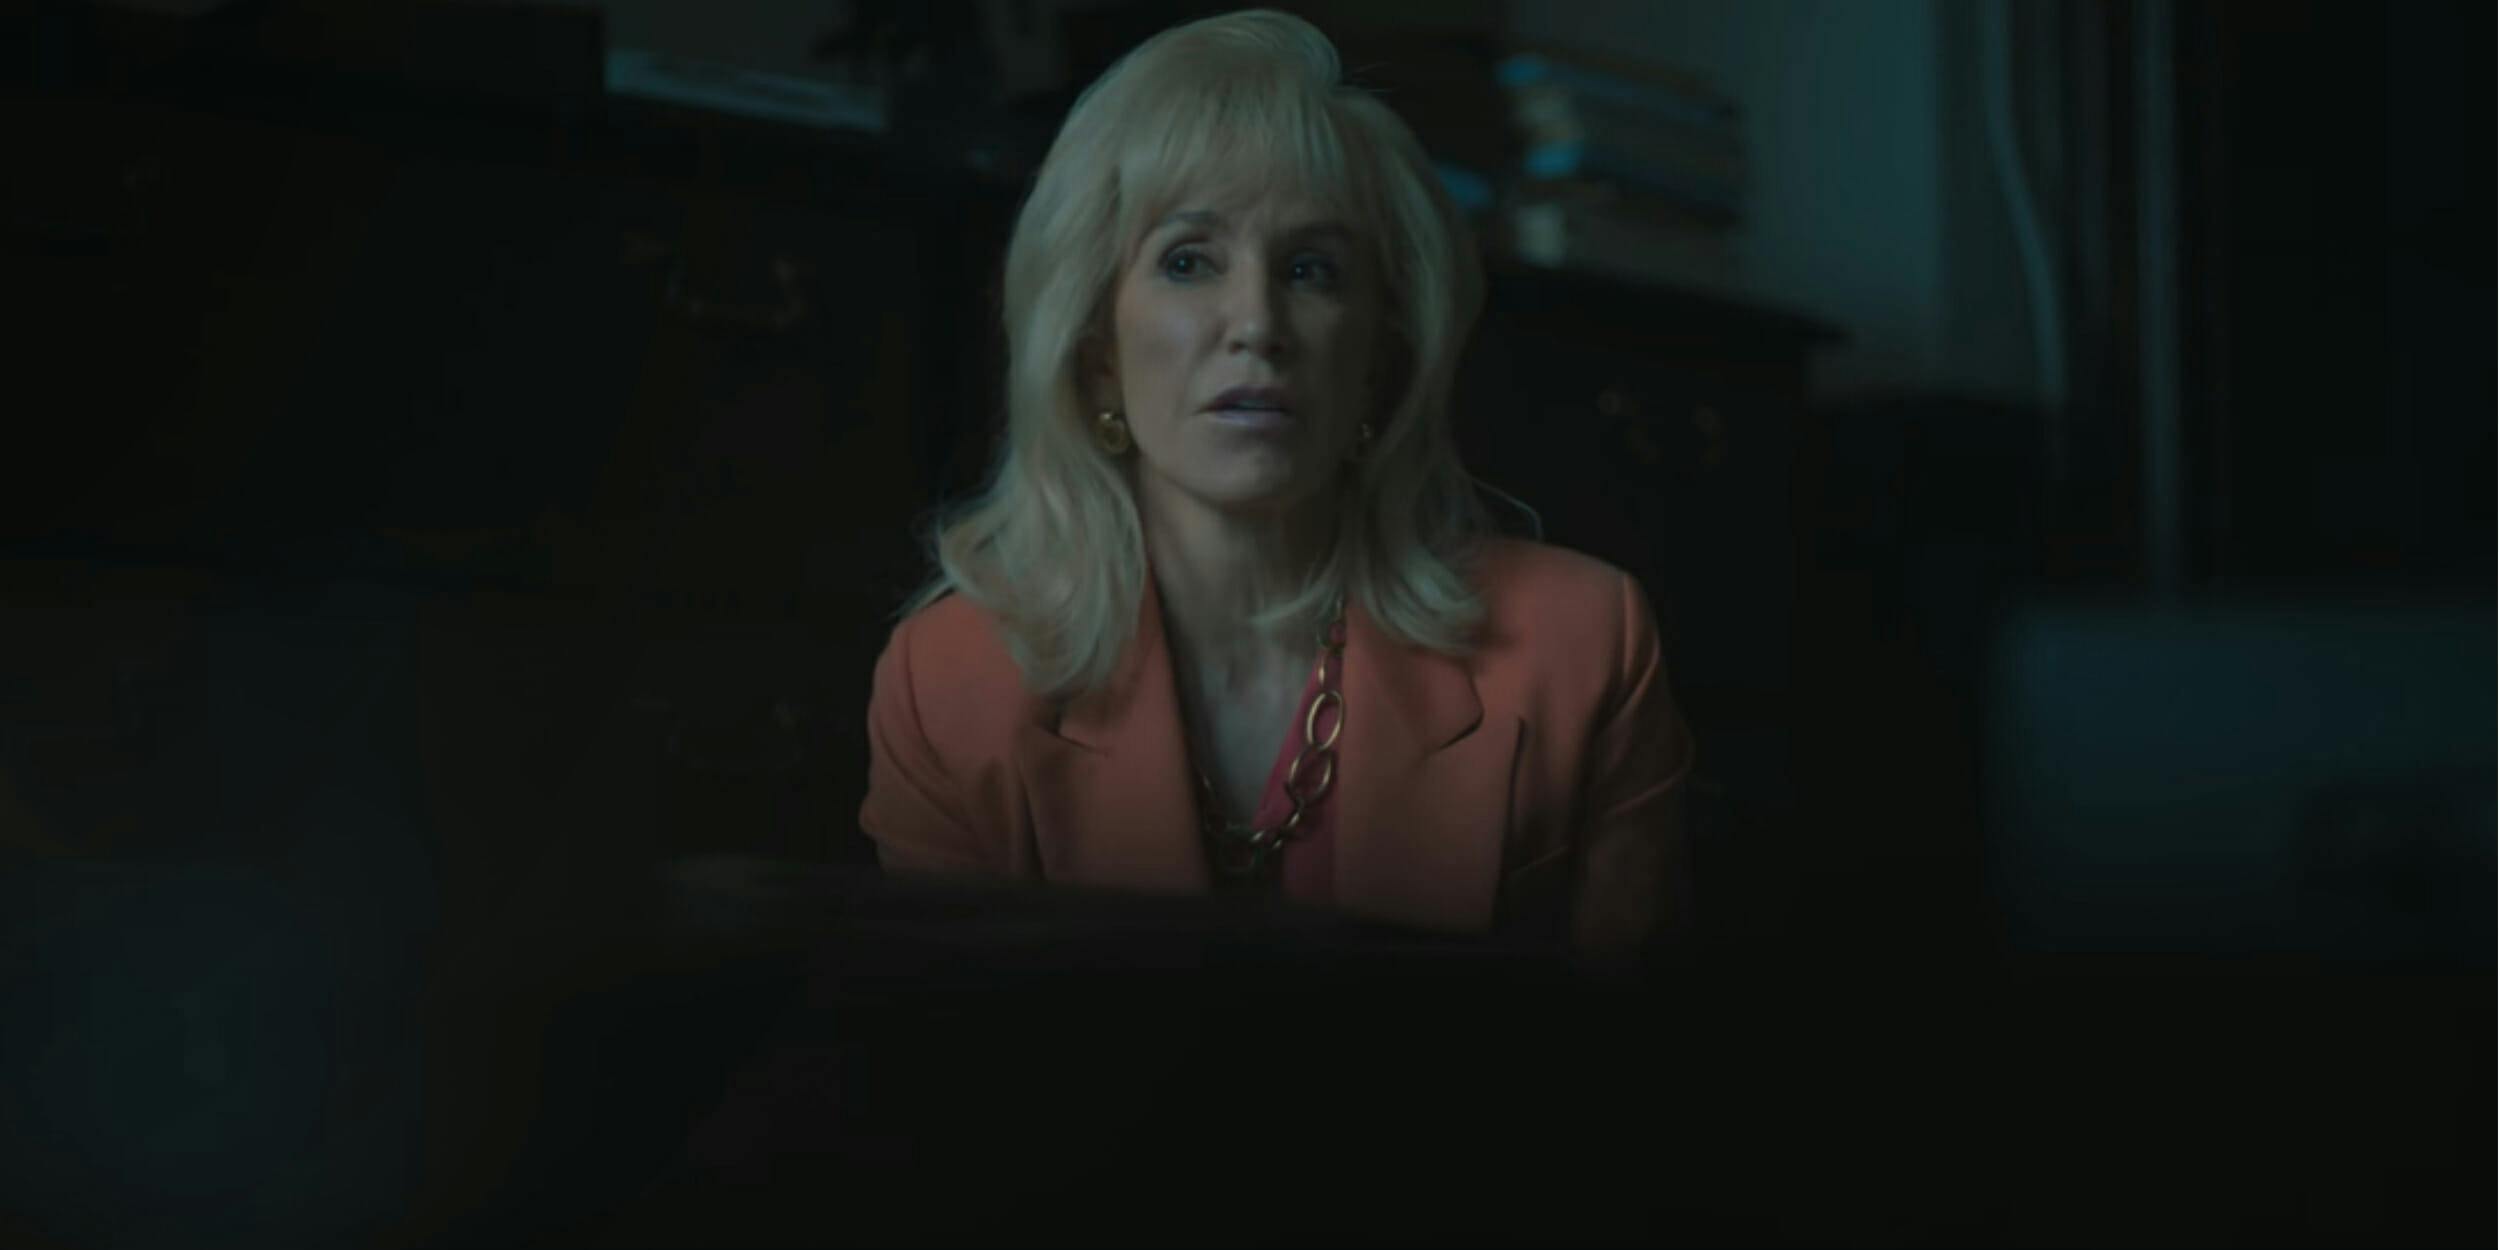 Linda Fairstein Disputes Portrayal In When They See Us